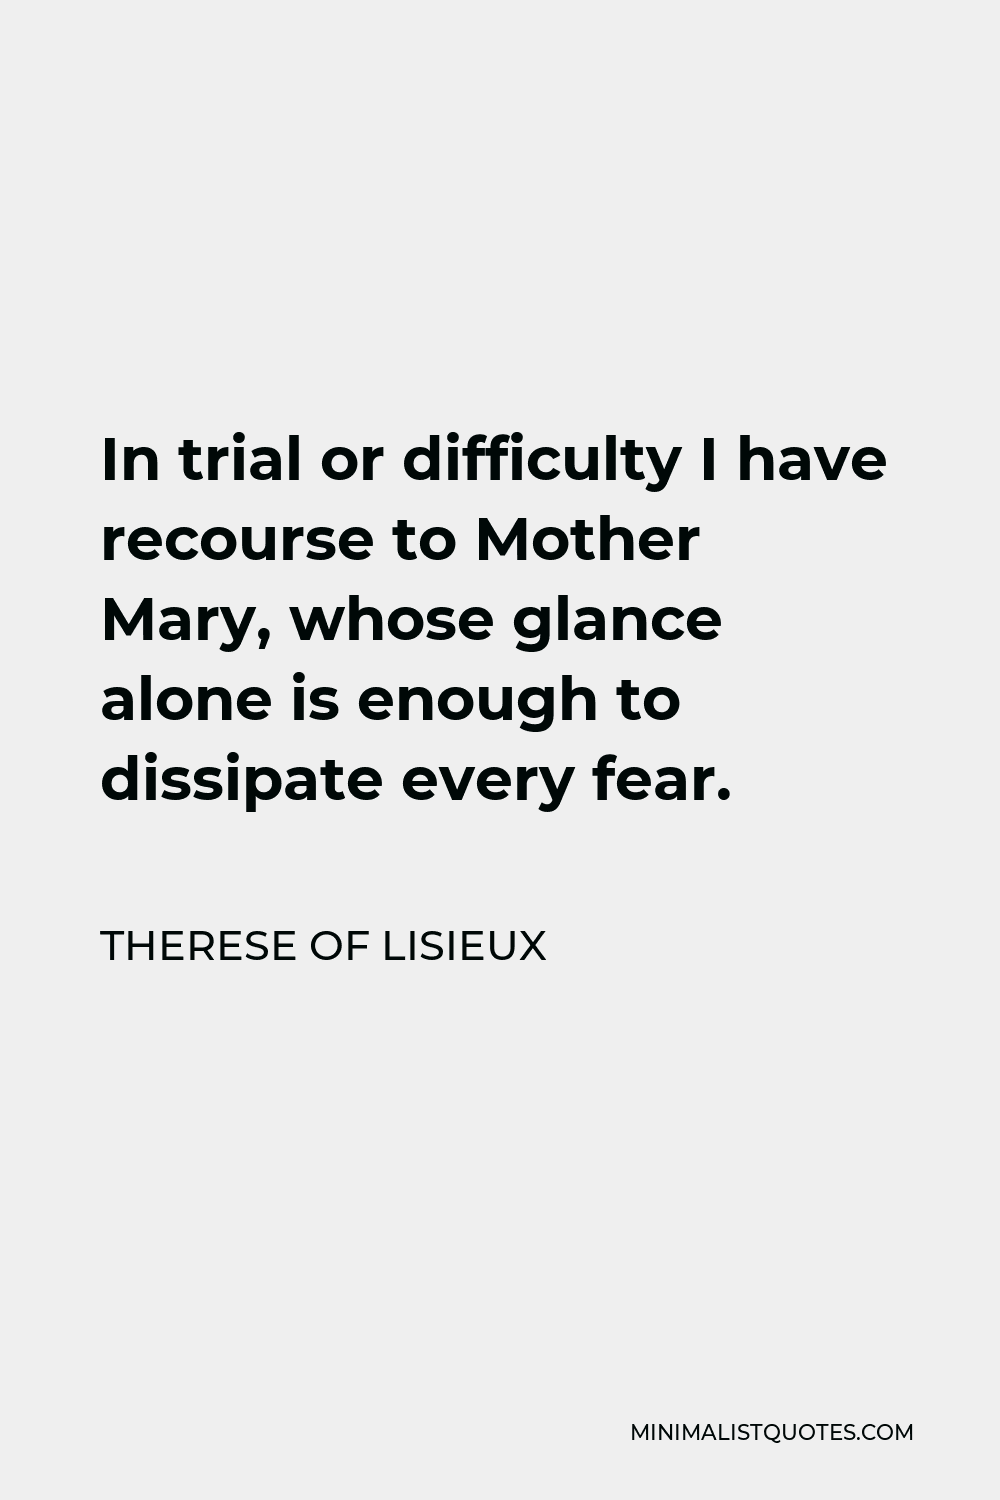 Therese of Lisieux Quote - In trial or difficulty I have recourse to Mother Mary, whose glance alone is enough to dissipate every fear.